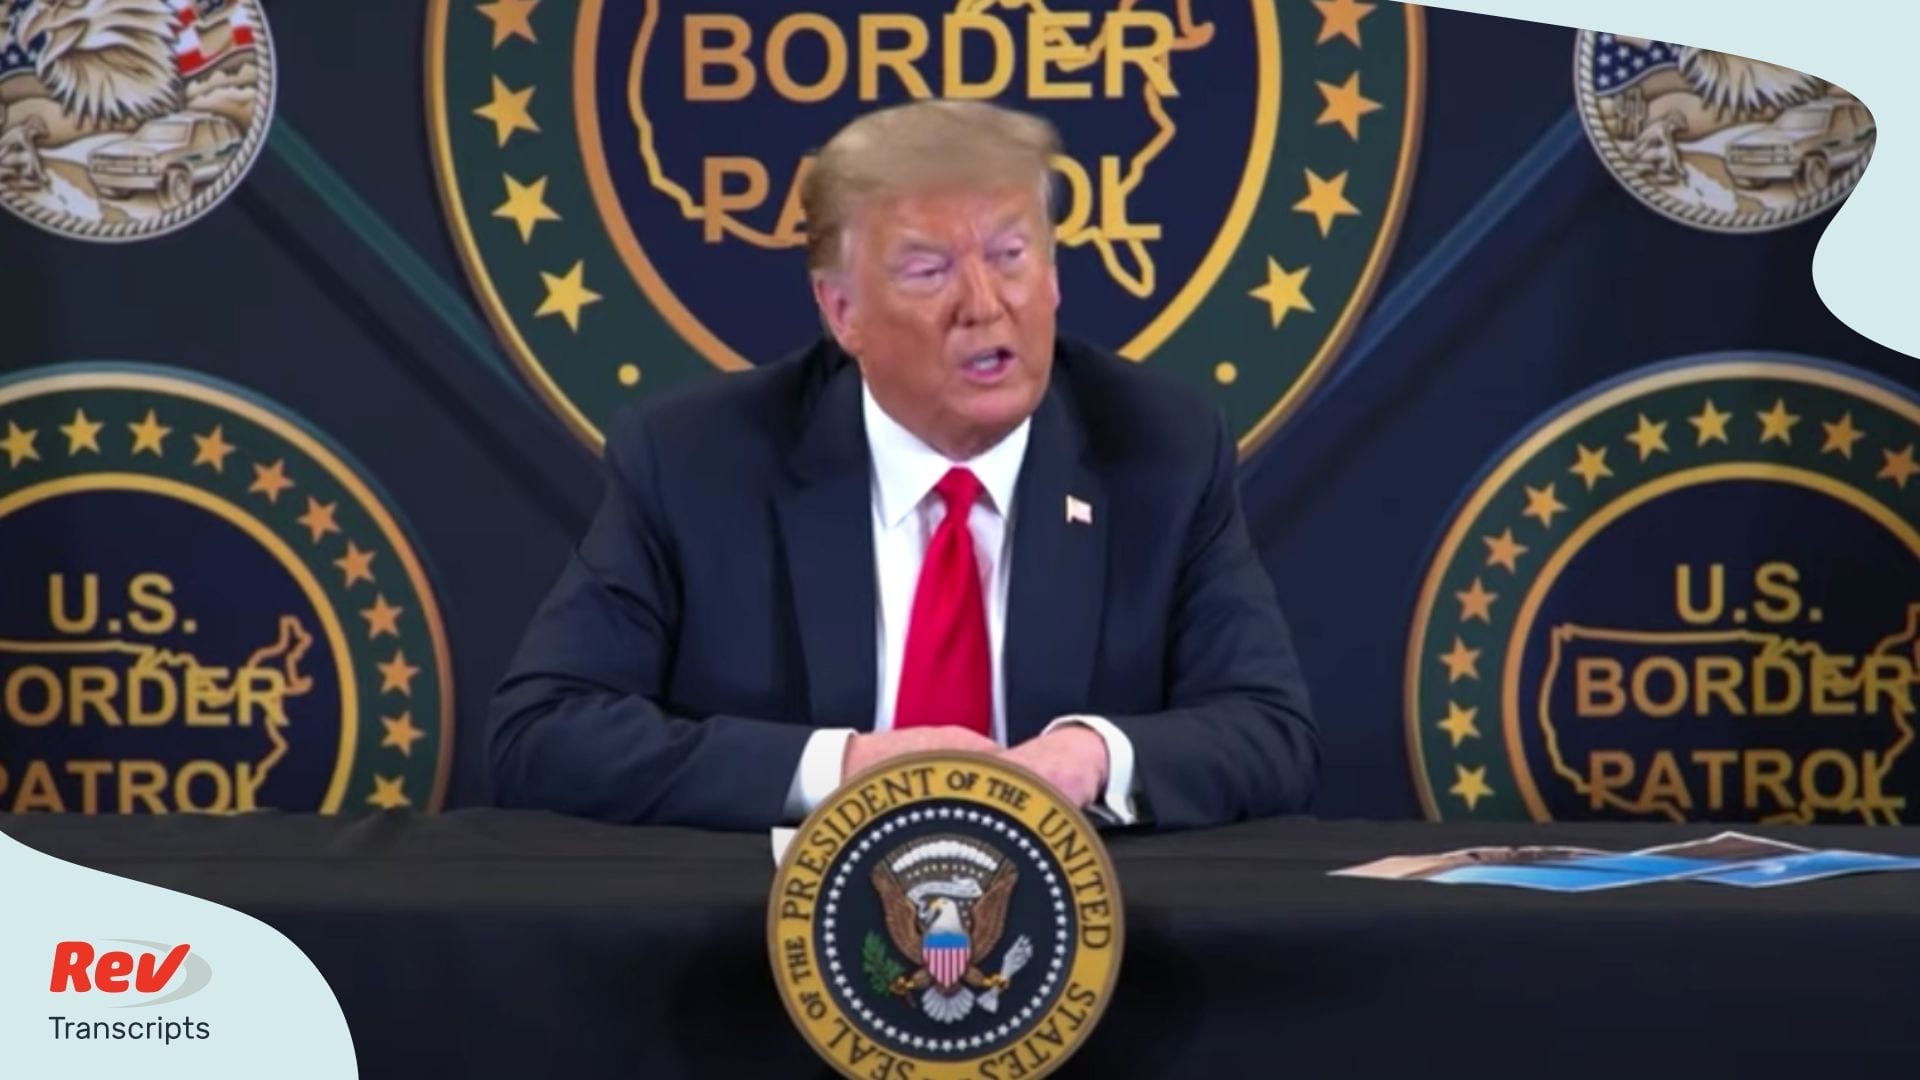 Trump Participates In Roundtable On Border Security